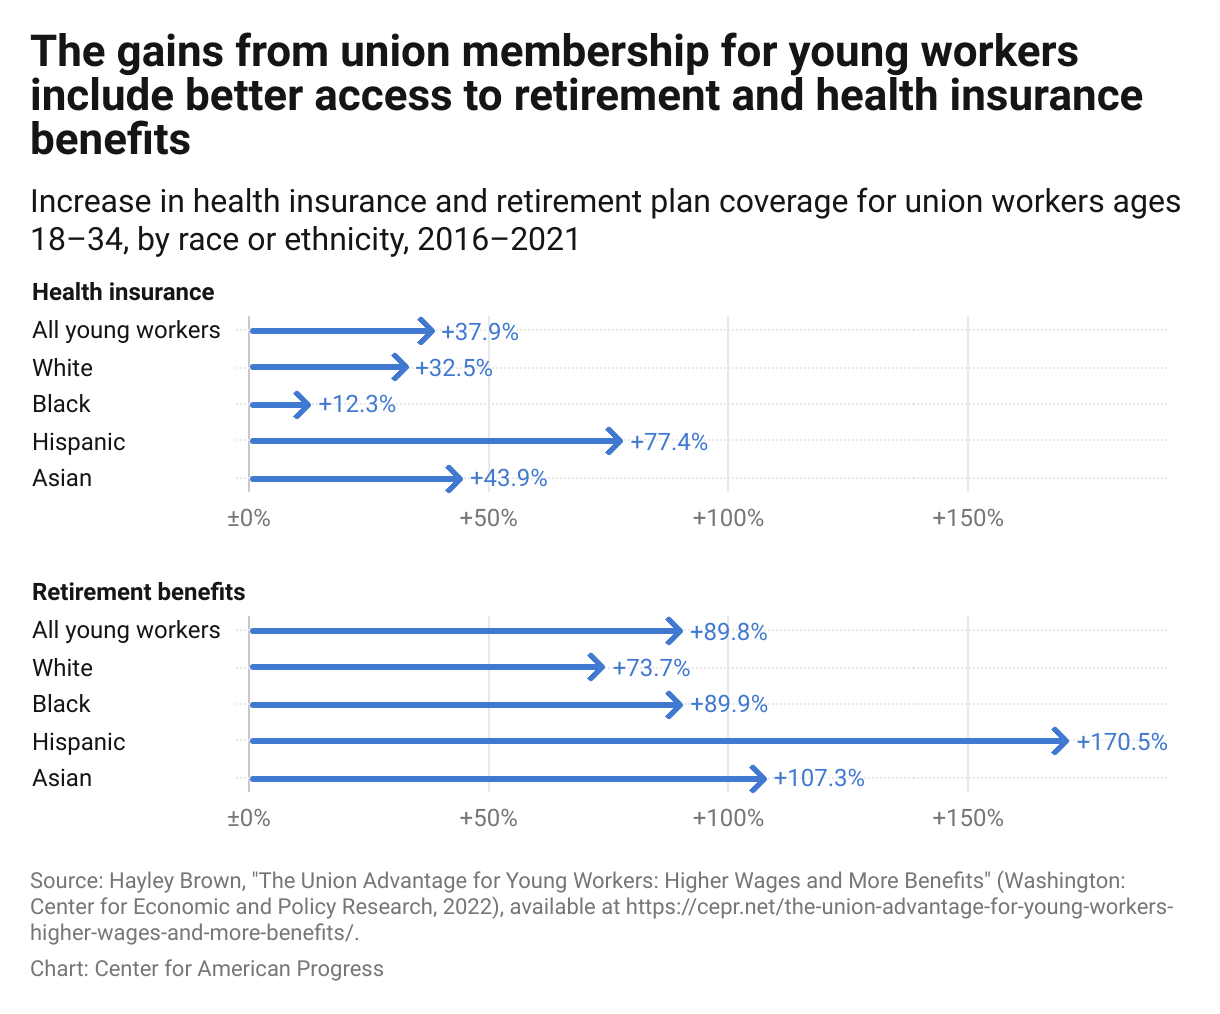 Bar chart showing that the likelihood of having health insurance and a retirement plan increases by 37.9 percent and 89.8 percent, respectively, for young workers who are members of labor unions.